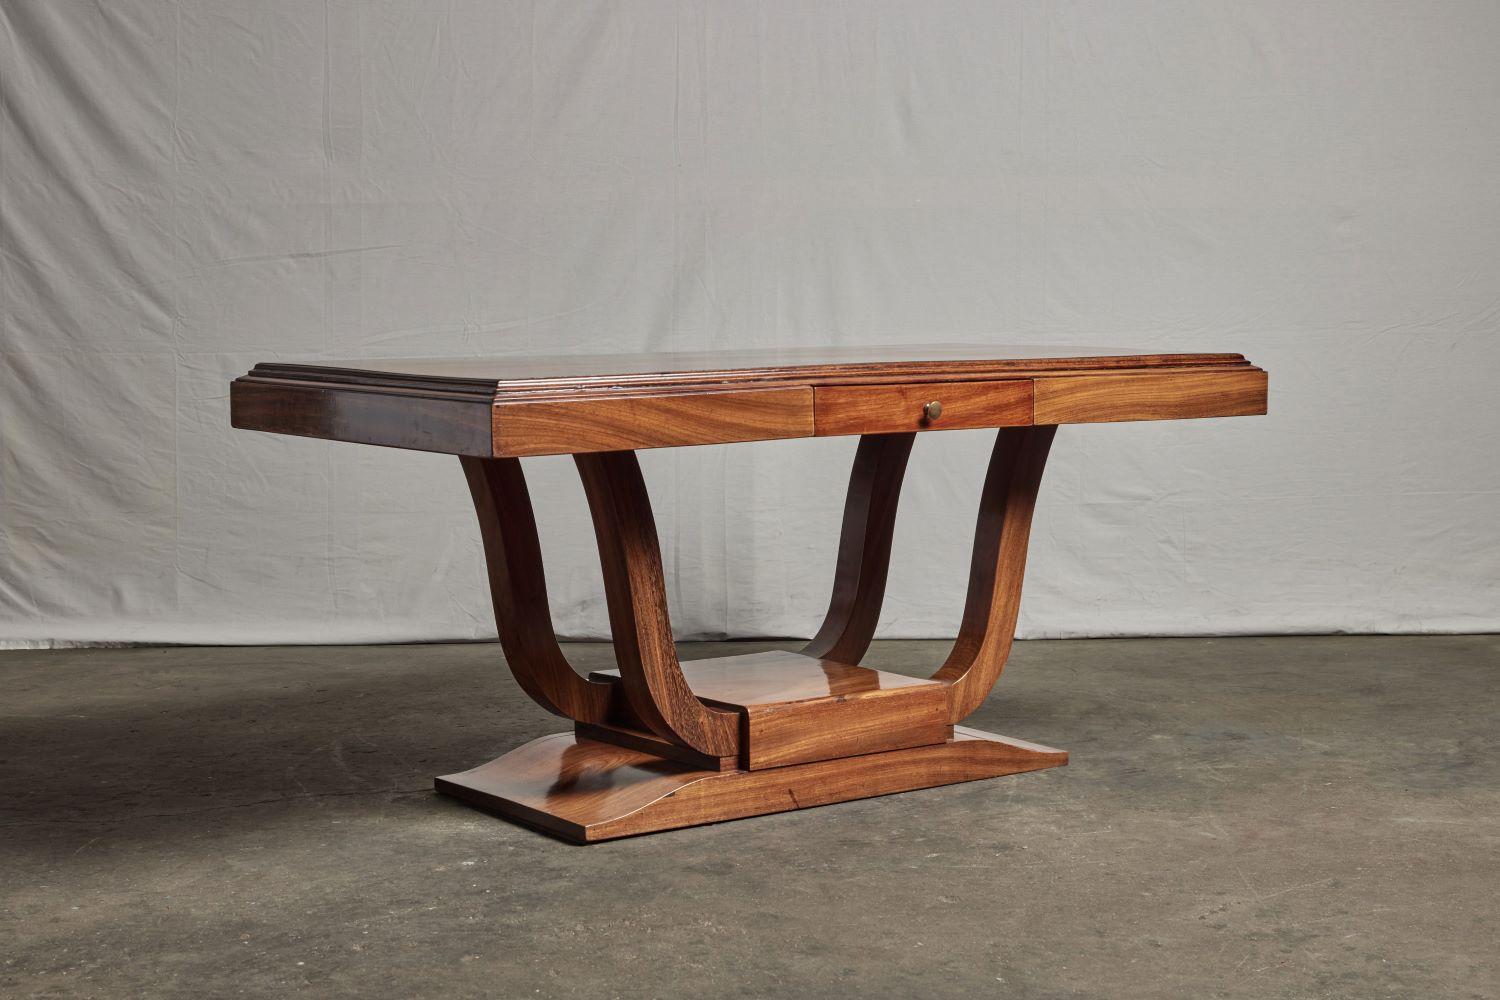 Early 20th Century Art Deco French Colonial Rosewood Desk In Good Condition For Sale In Pasadena, CA